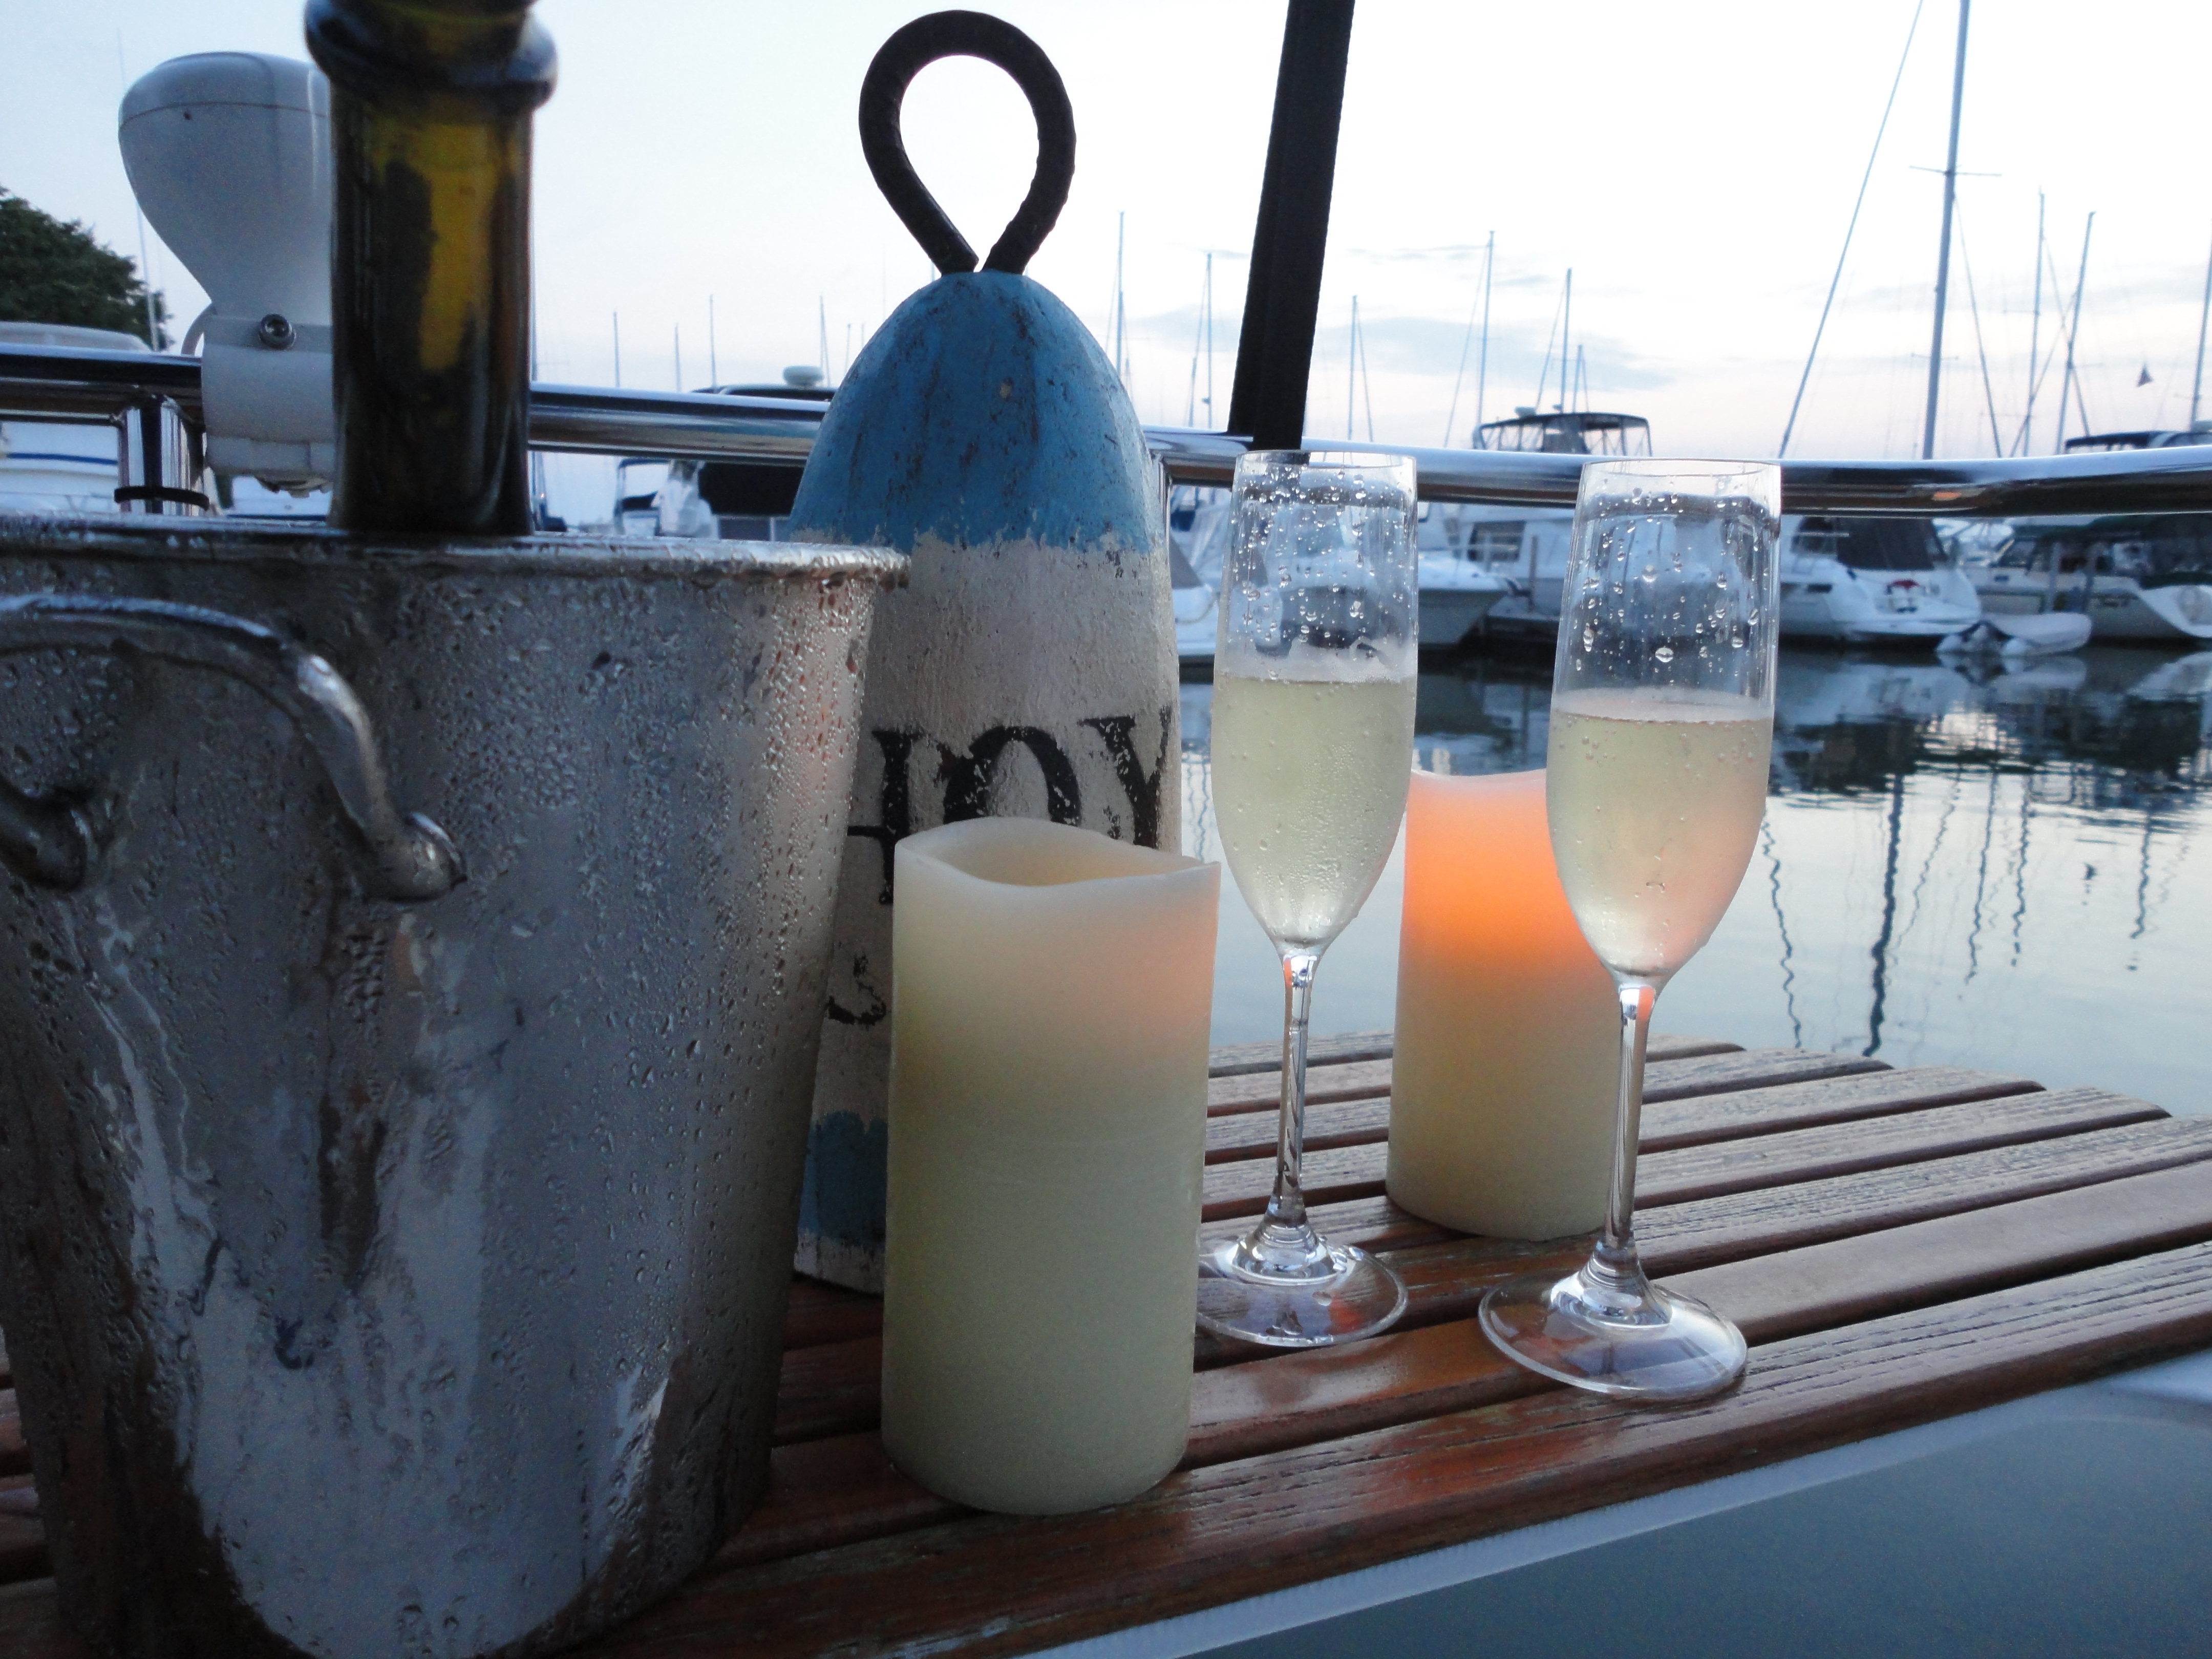 Sunset with champagne on the sailboat